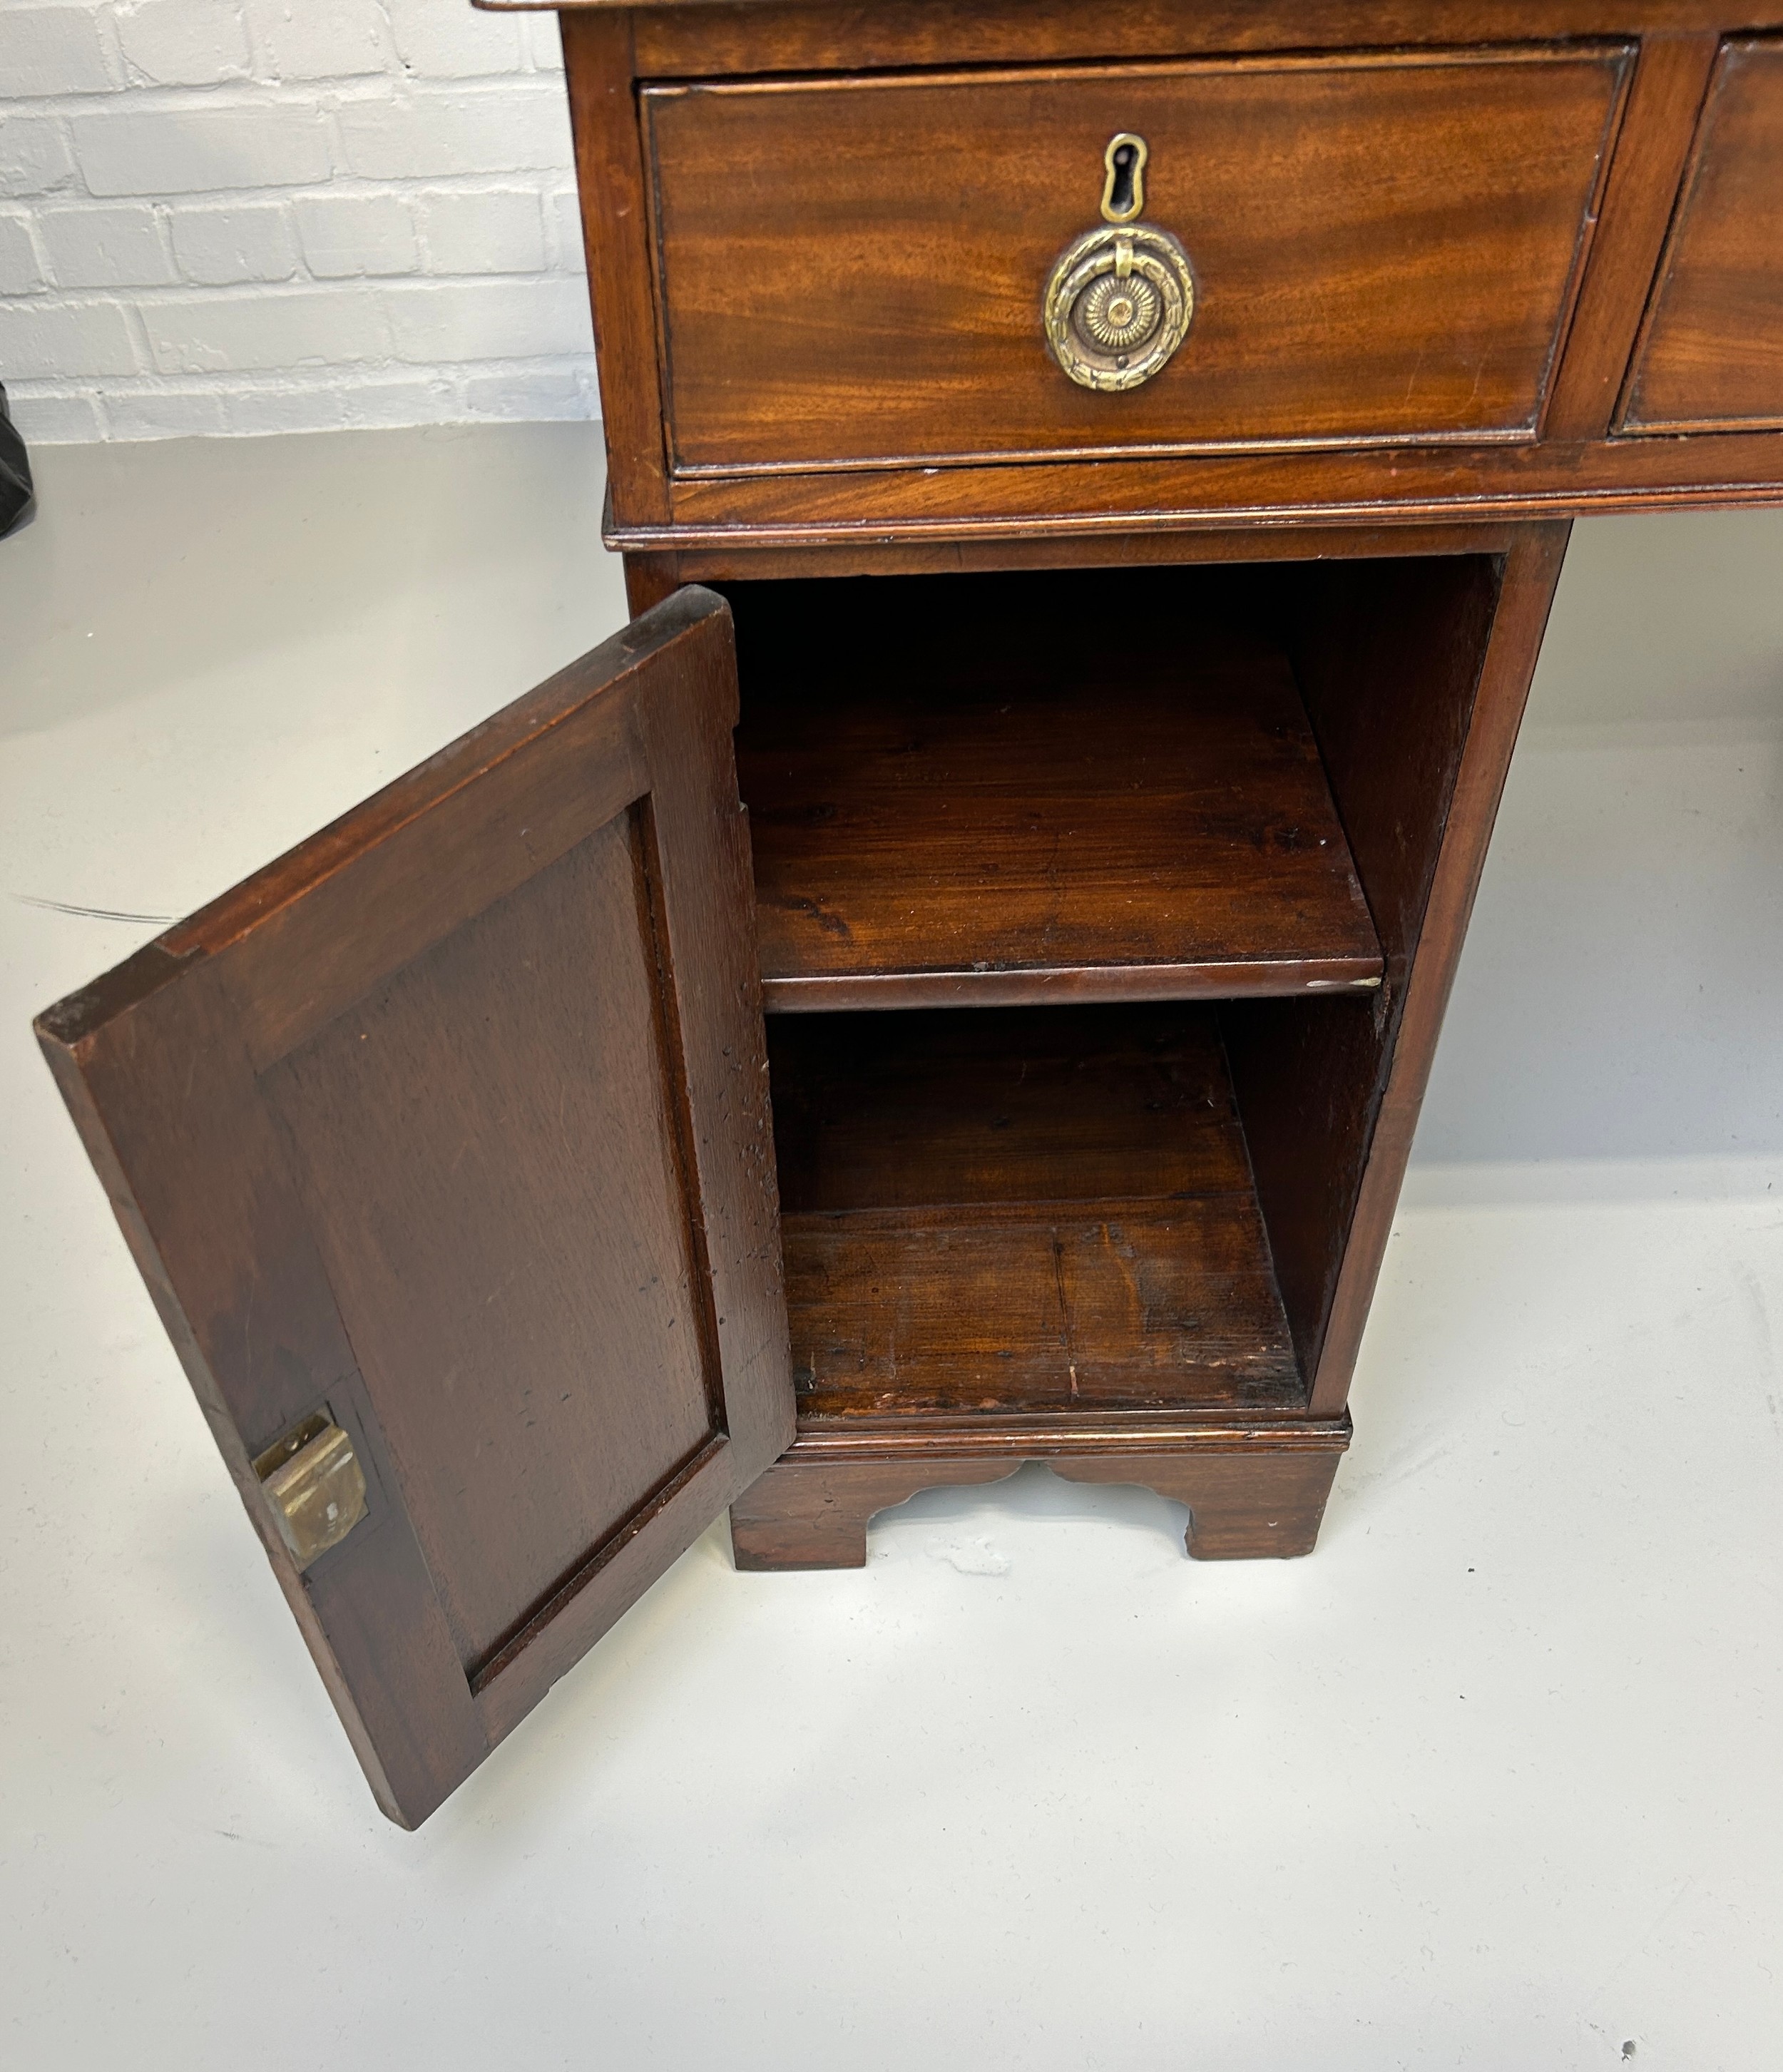 AN EARLY 19TH CENTRAL PARTNERS DESK, Two pedestals, each with ten drawers with brass handles. - Image 11 of 12